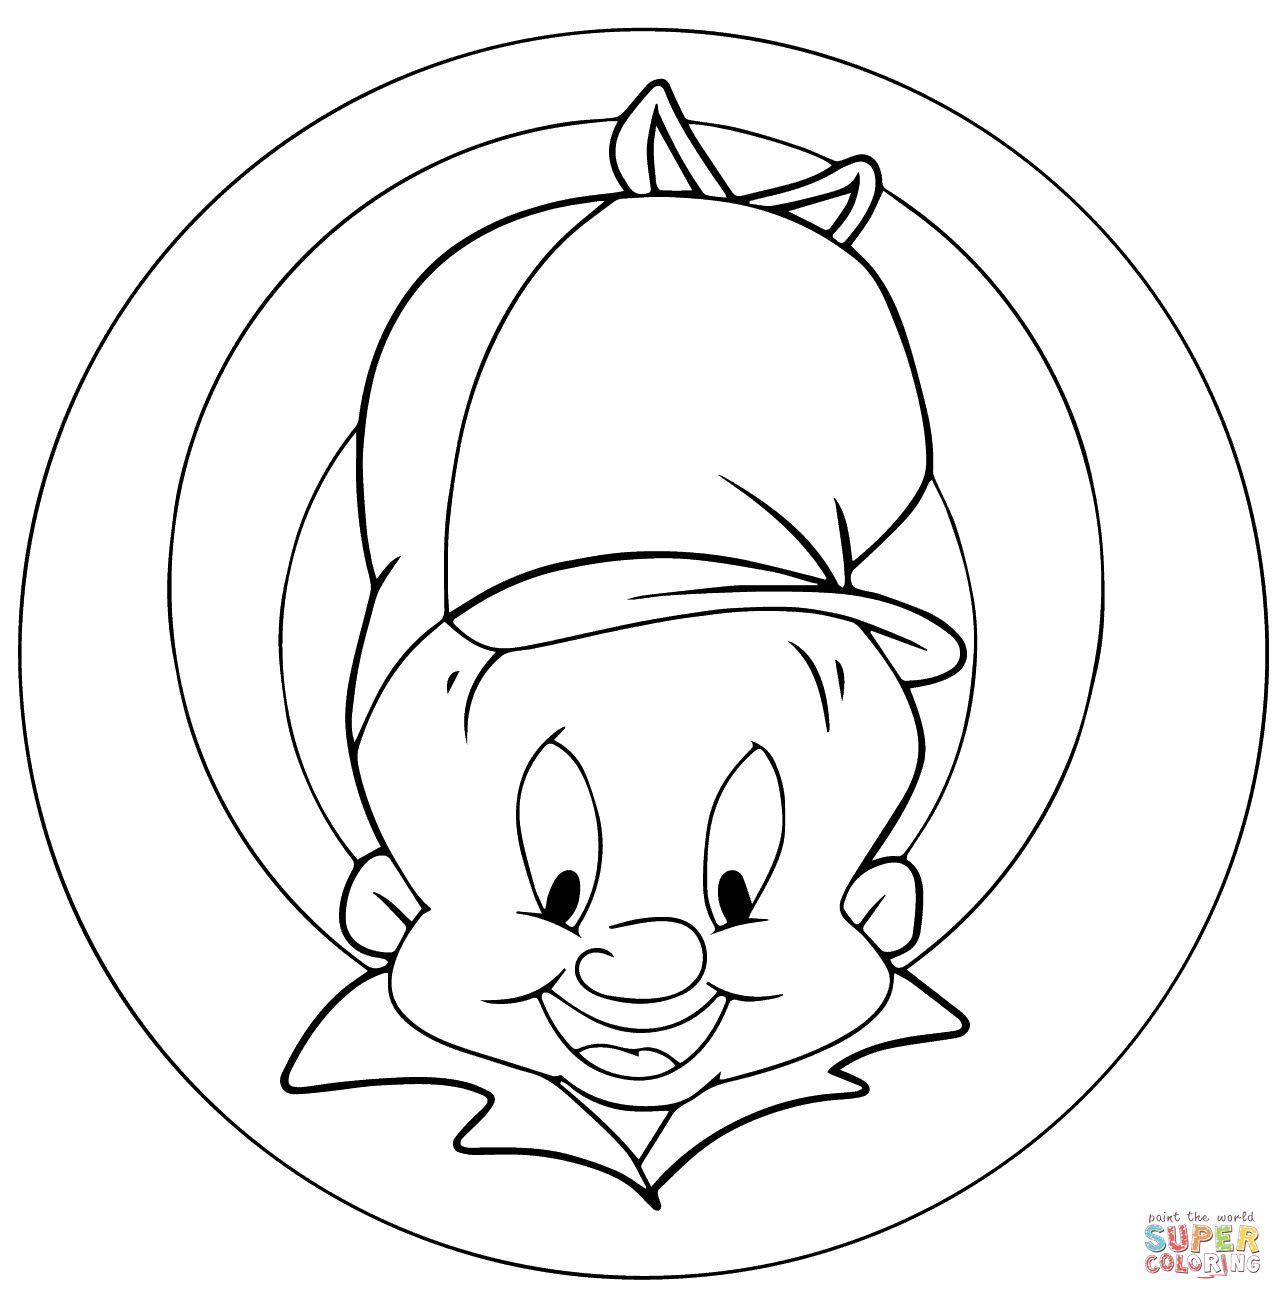 Looney tunes elmer fudd coloring page free printable coloring pages